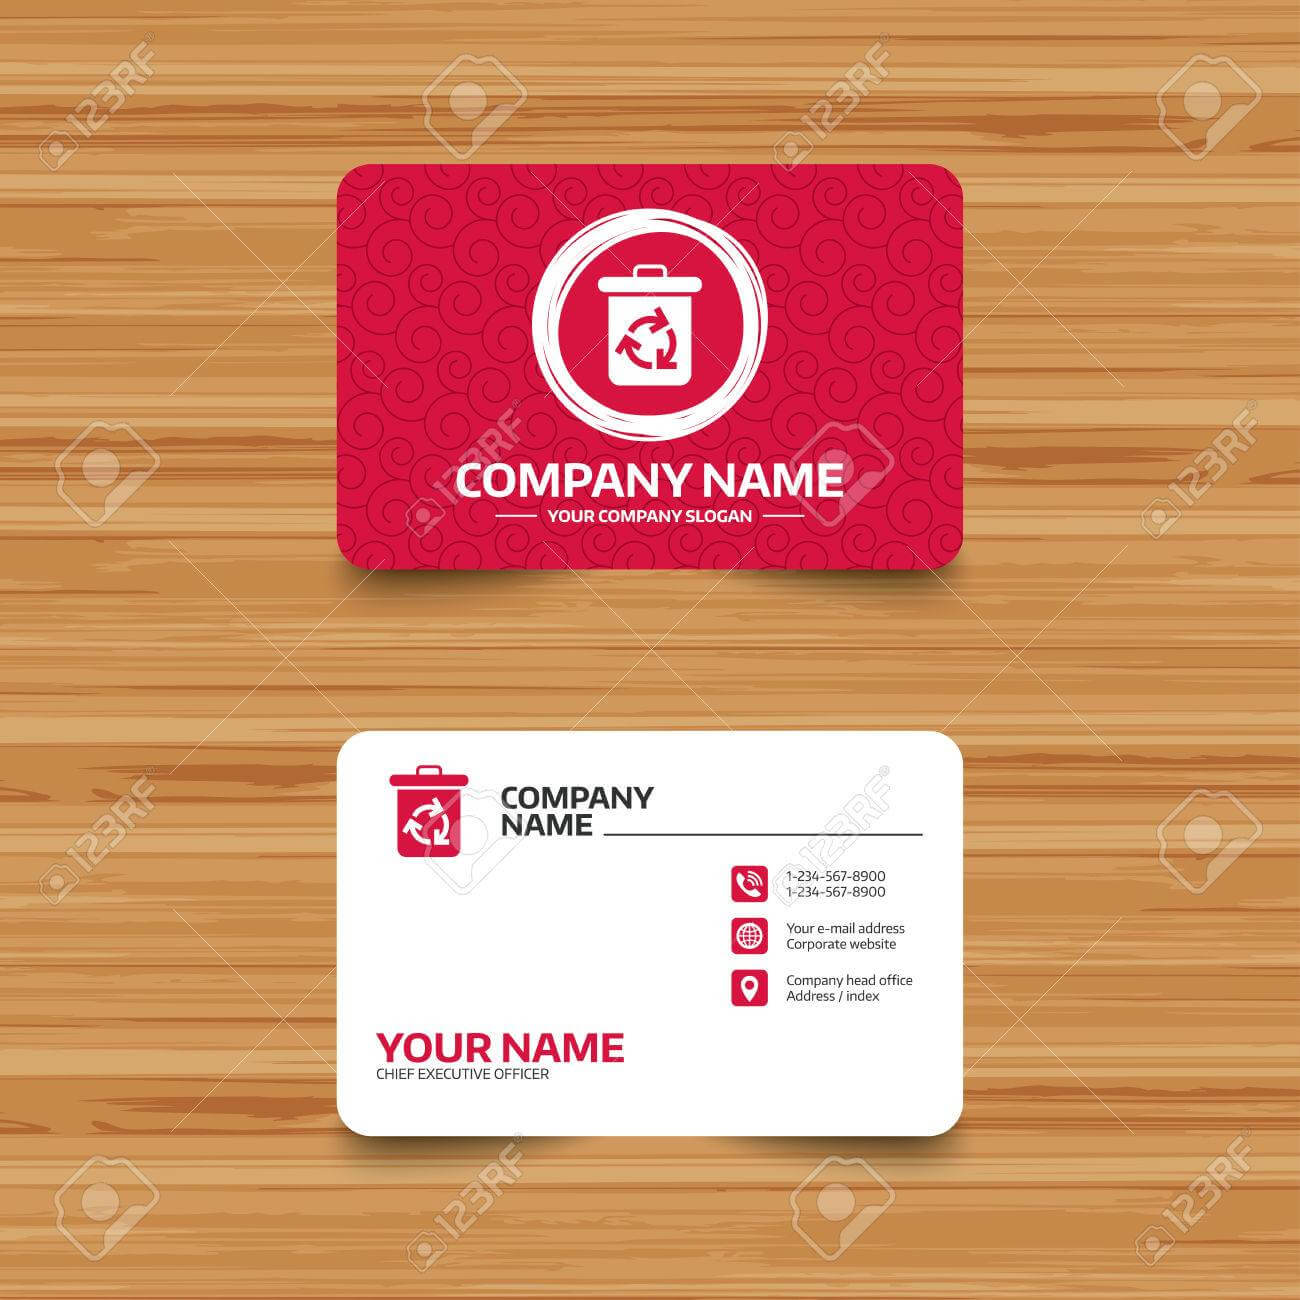 Business Card Template With Texture. Recycle Bin Icon. Reuse Or Reduce  Symbol. Phone, Web And Location Icons. Visiting Card Vector Intended For Bin Card Template